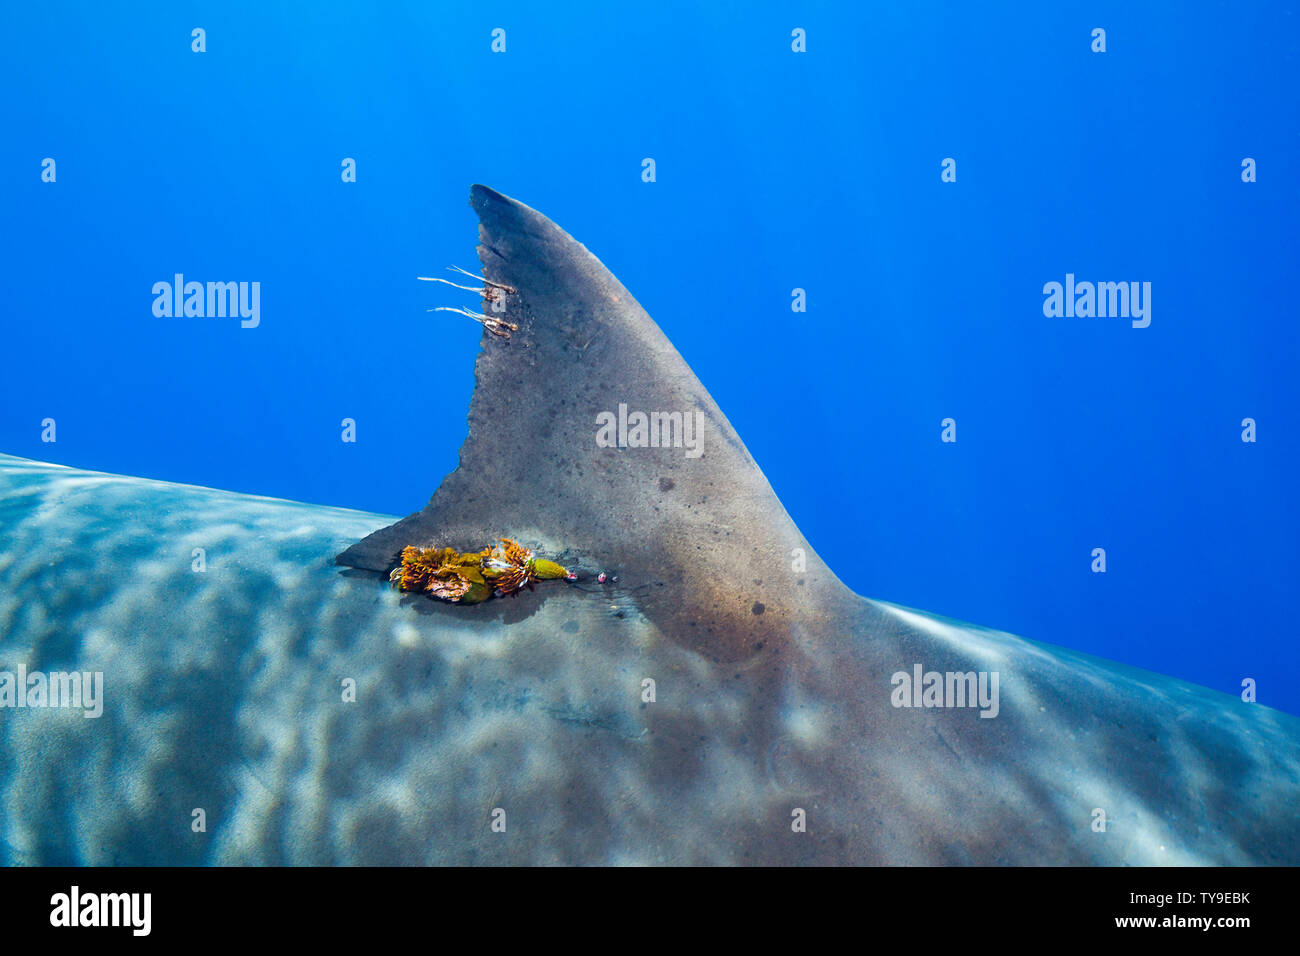 Many of the great white sharks, Carcharodon carcharias, off Guadalupe Island, Mexico, have been tagged for various scientific studies. The tag at the Stock Photo